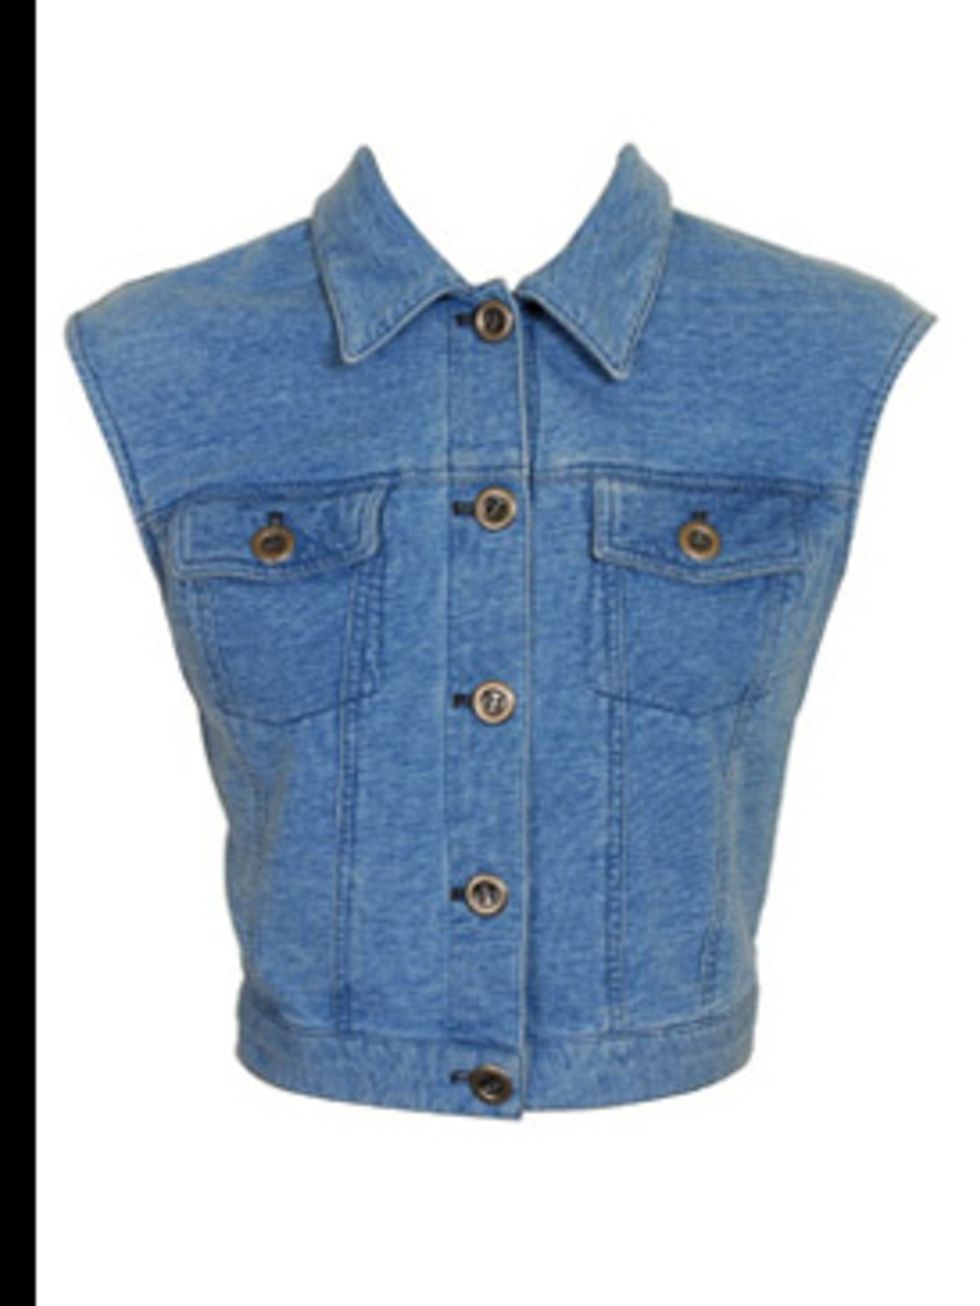 <p>Denim waistcoat, £225, by Opening Ceremony at <a href="http://www.brownsfashion.com/product/99340.htm">Browns</a></p>